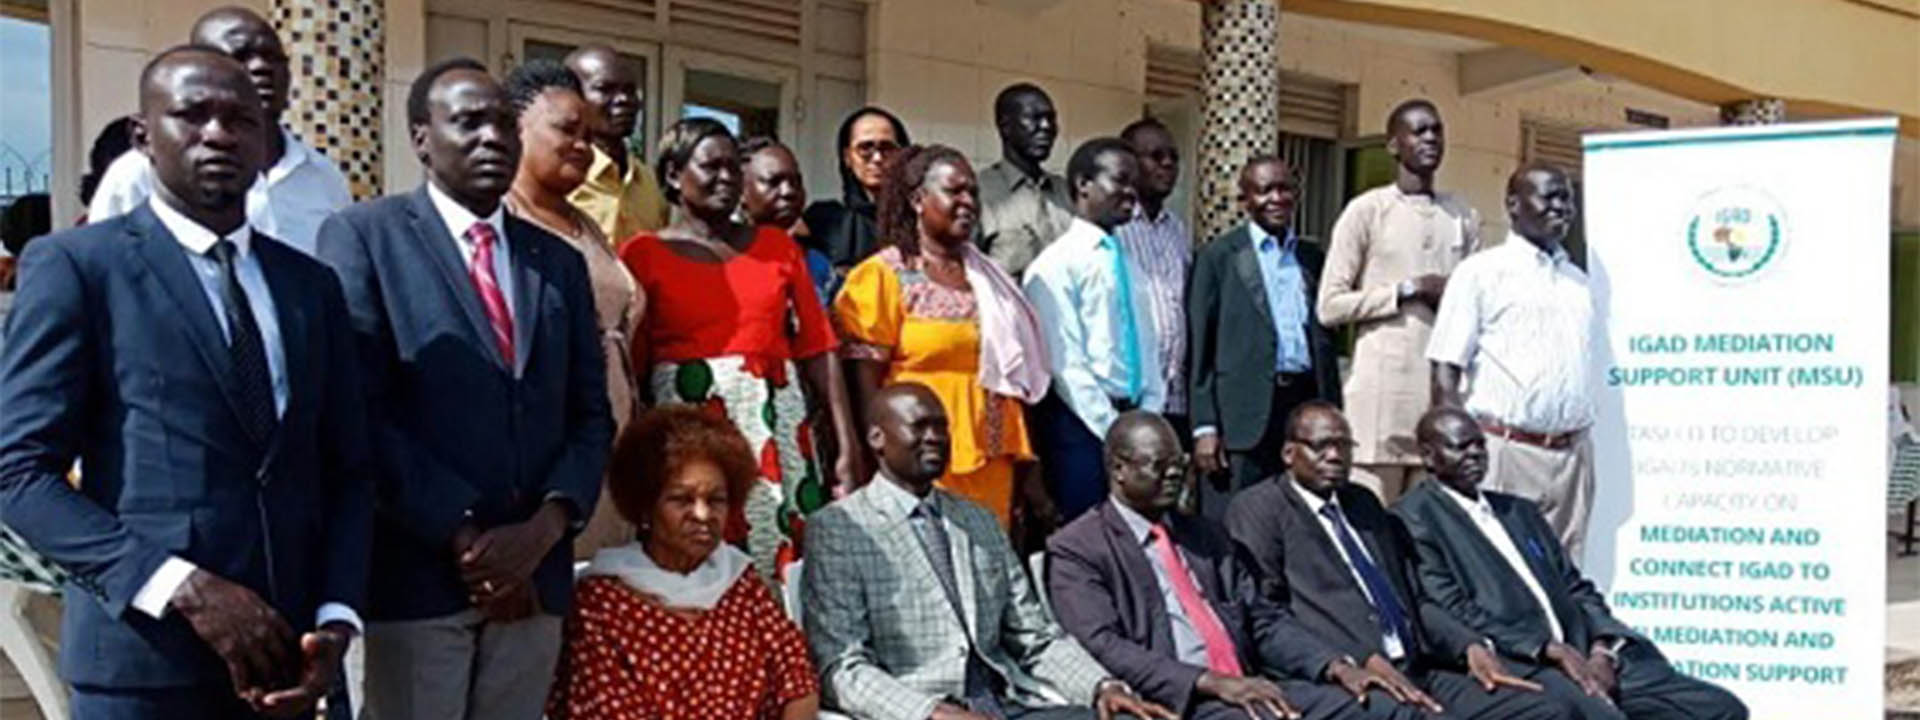 IGAD MSU Provides South Sudan National Institutions with Capacity Building and Technical Assistance on Mediation, Conflict Prevention and Peace Building